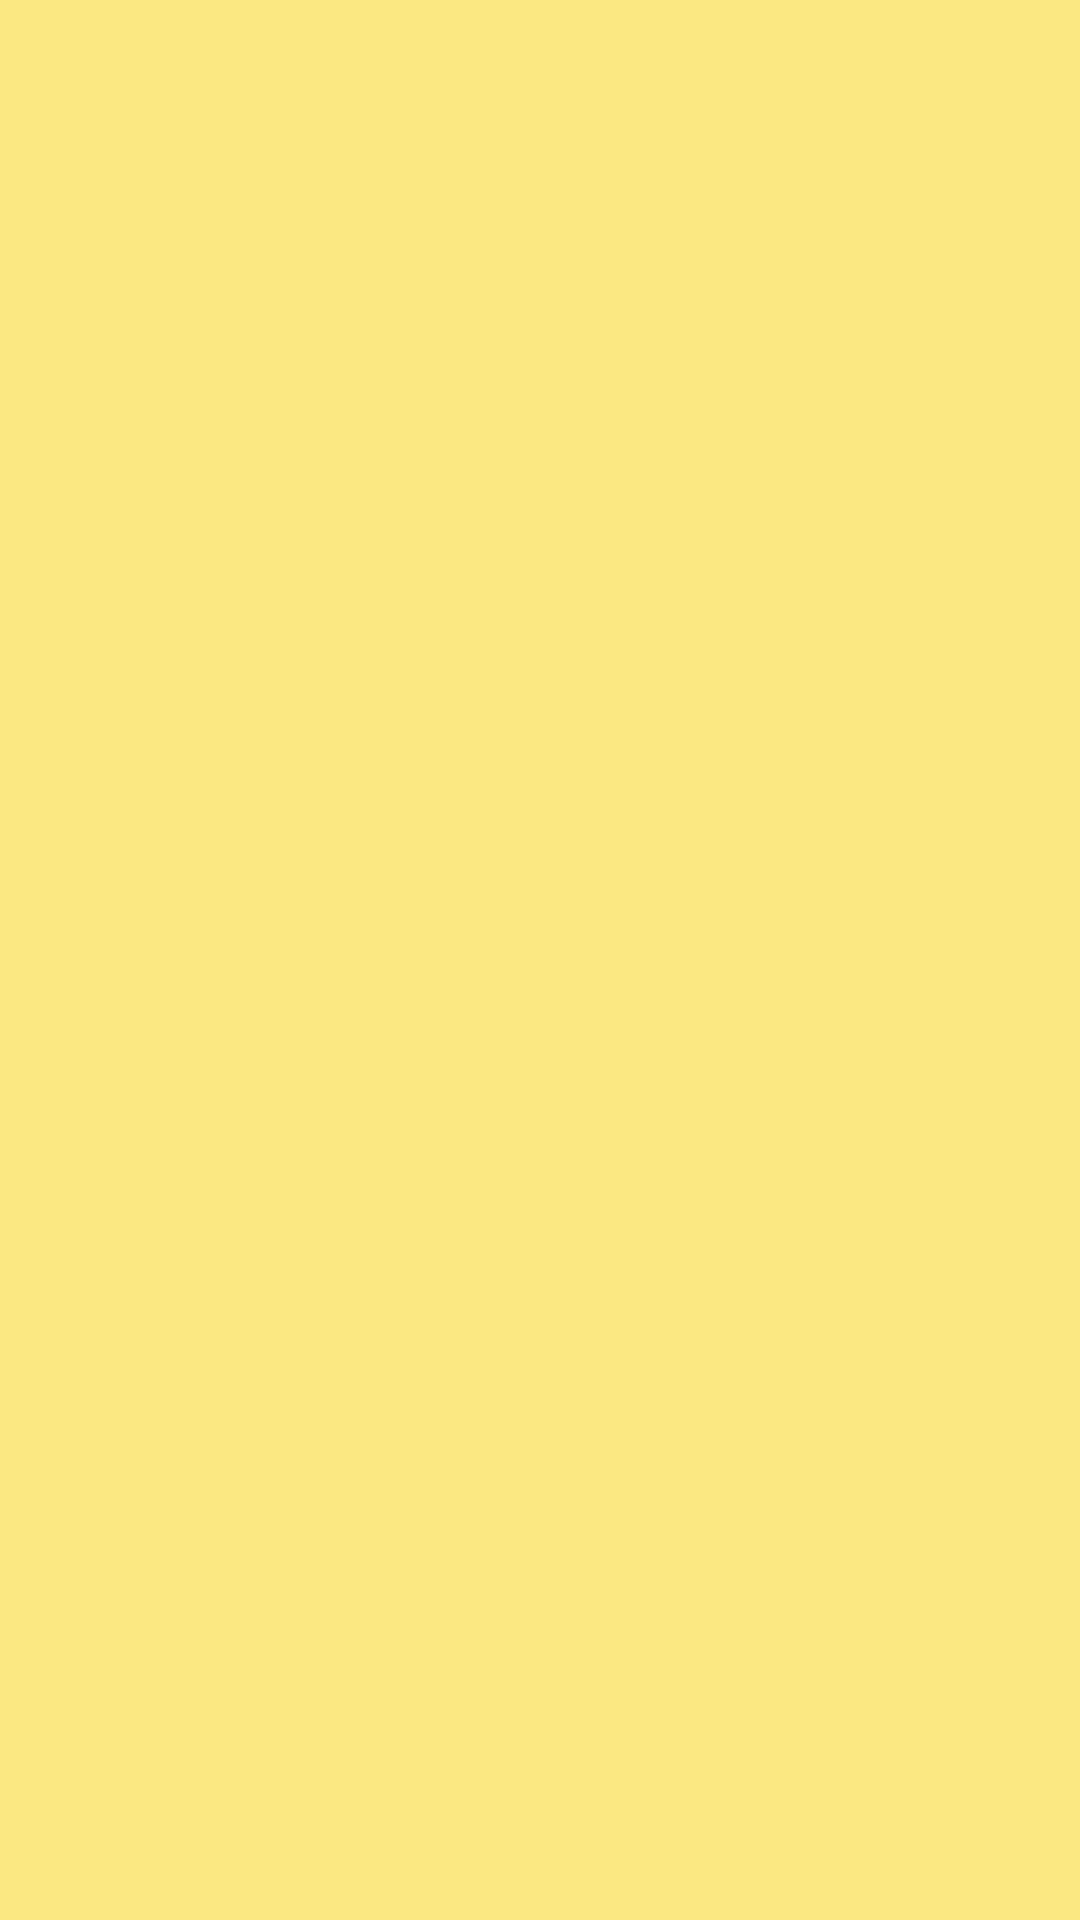 1080x1920 Yellow Crayola Solid Color Background